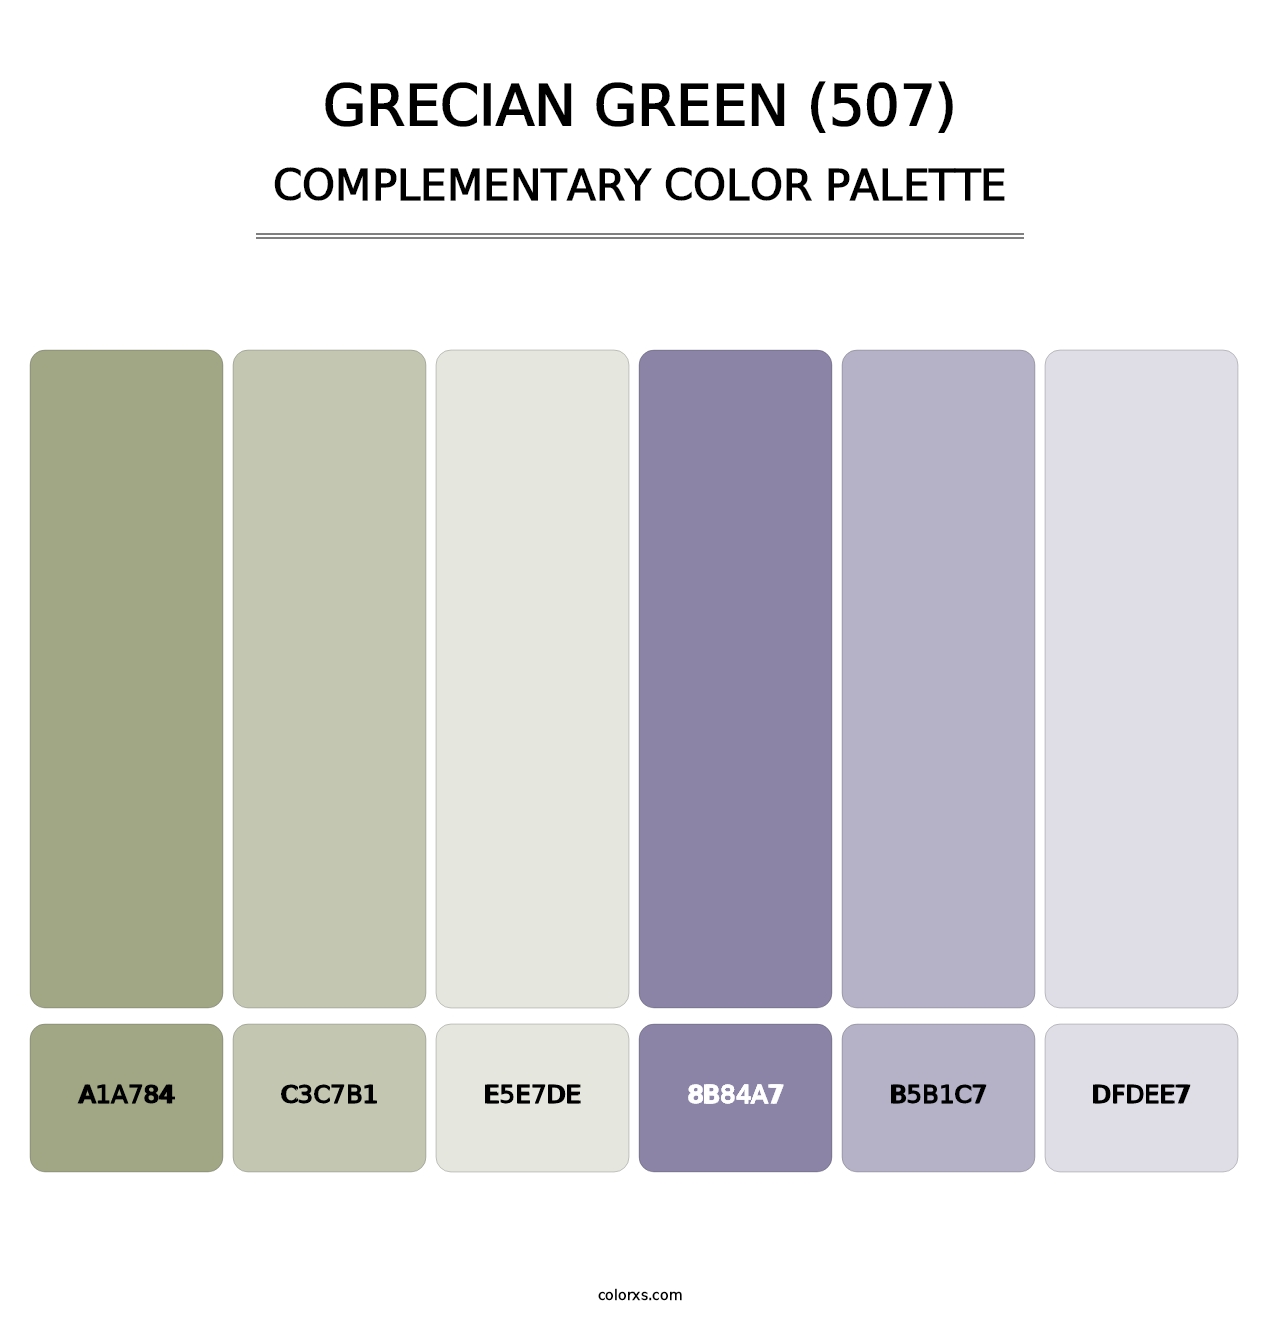 Grecian Green (507) - Complementary Color Palette